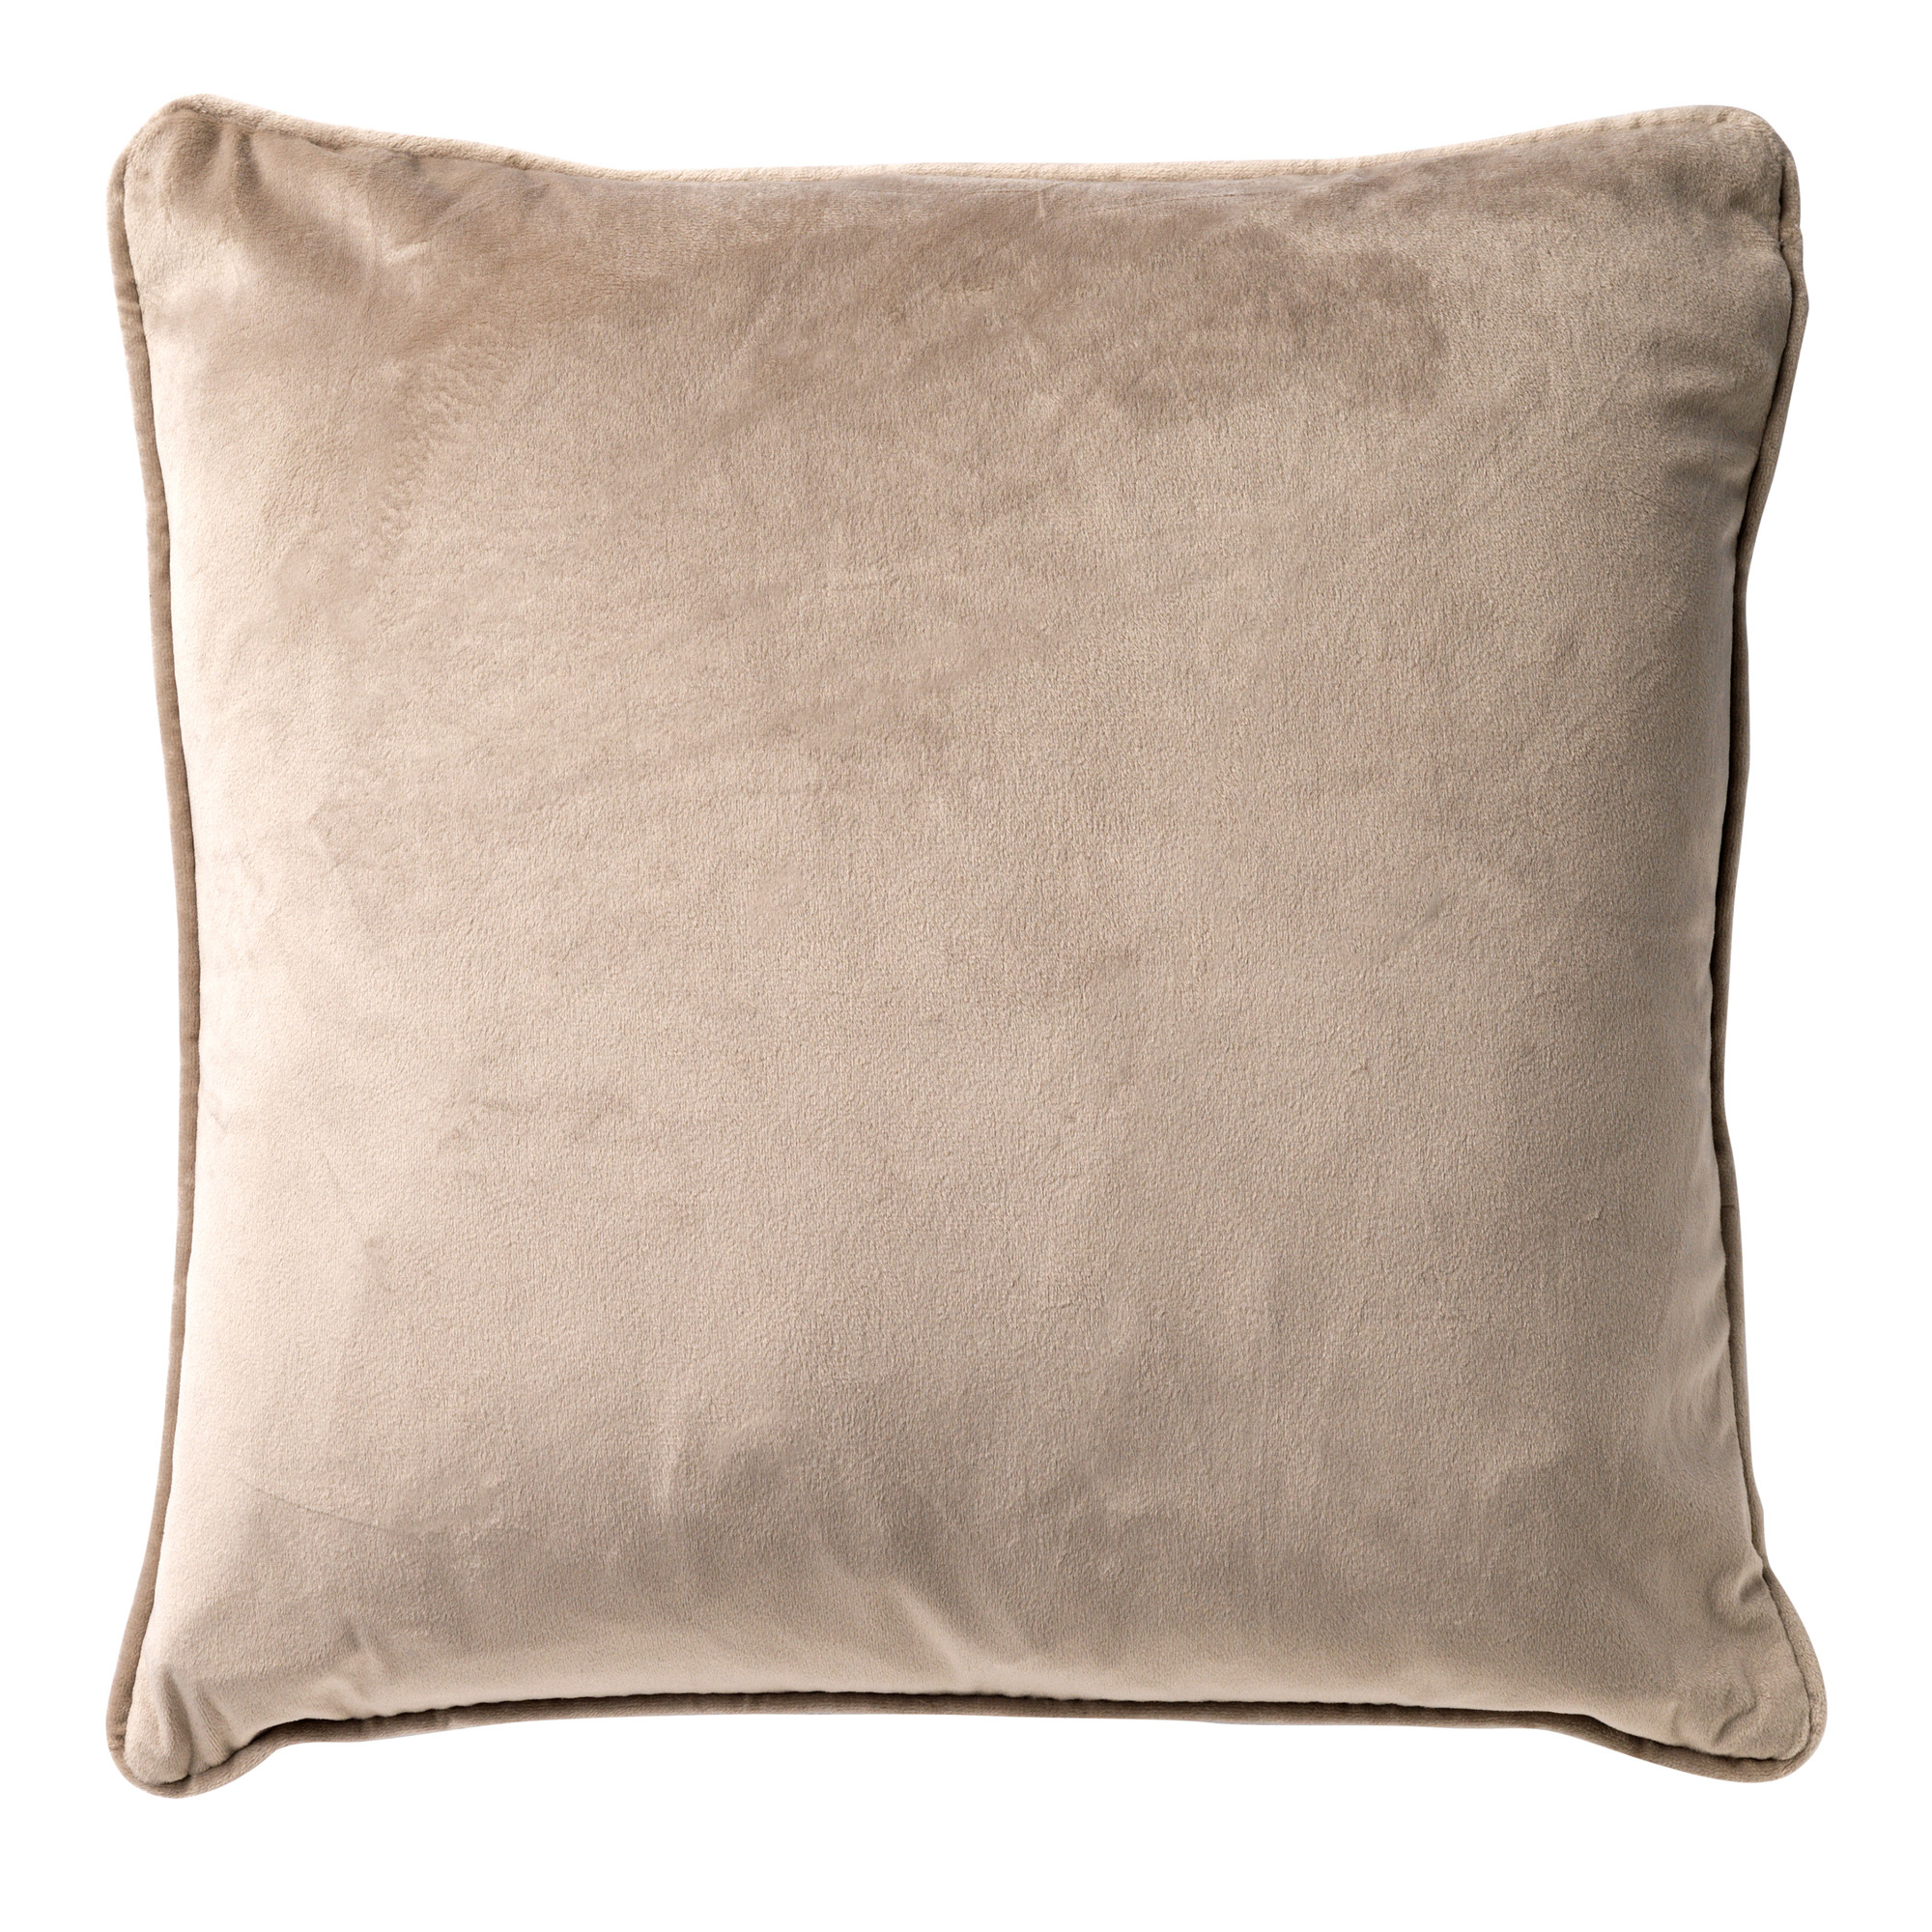 FINNA - Kussenhoes 45x45 cm 100% gerecycled polyester - Eco Line collectie - Pumice Stone - beige